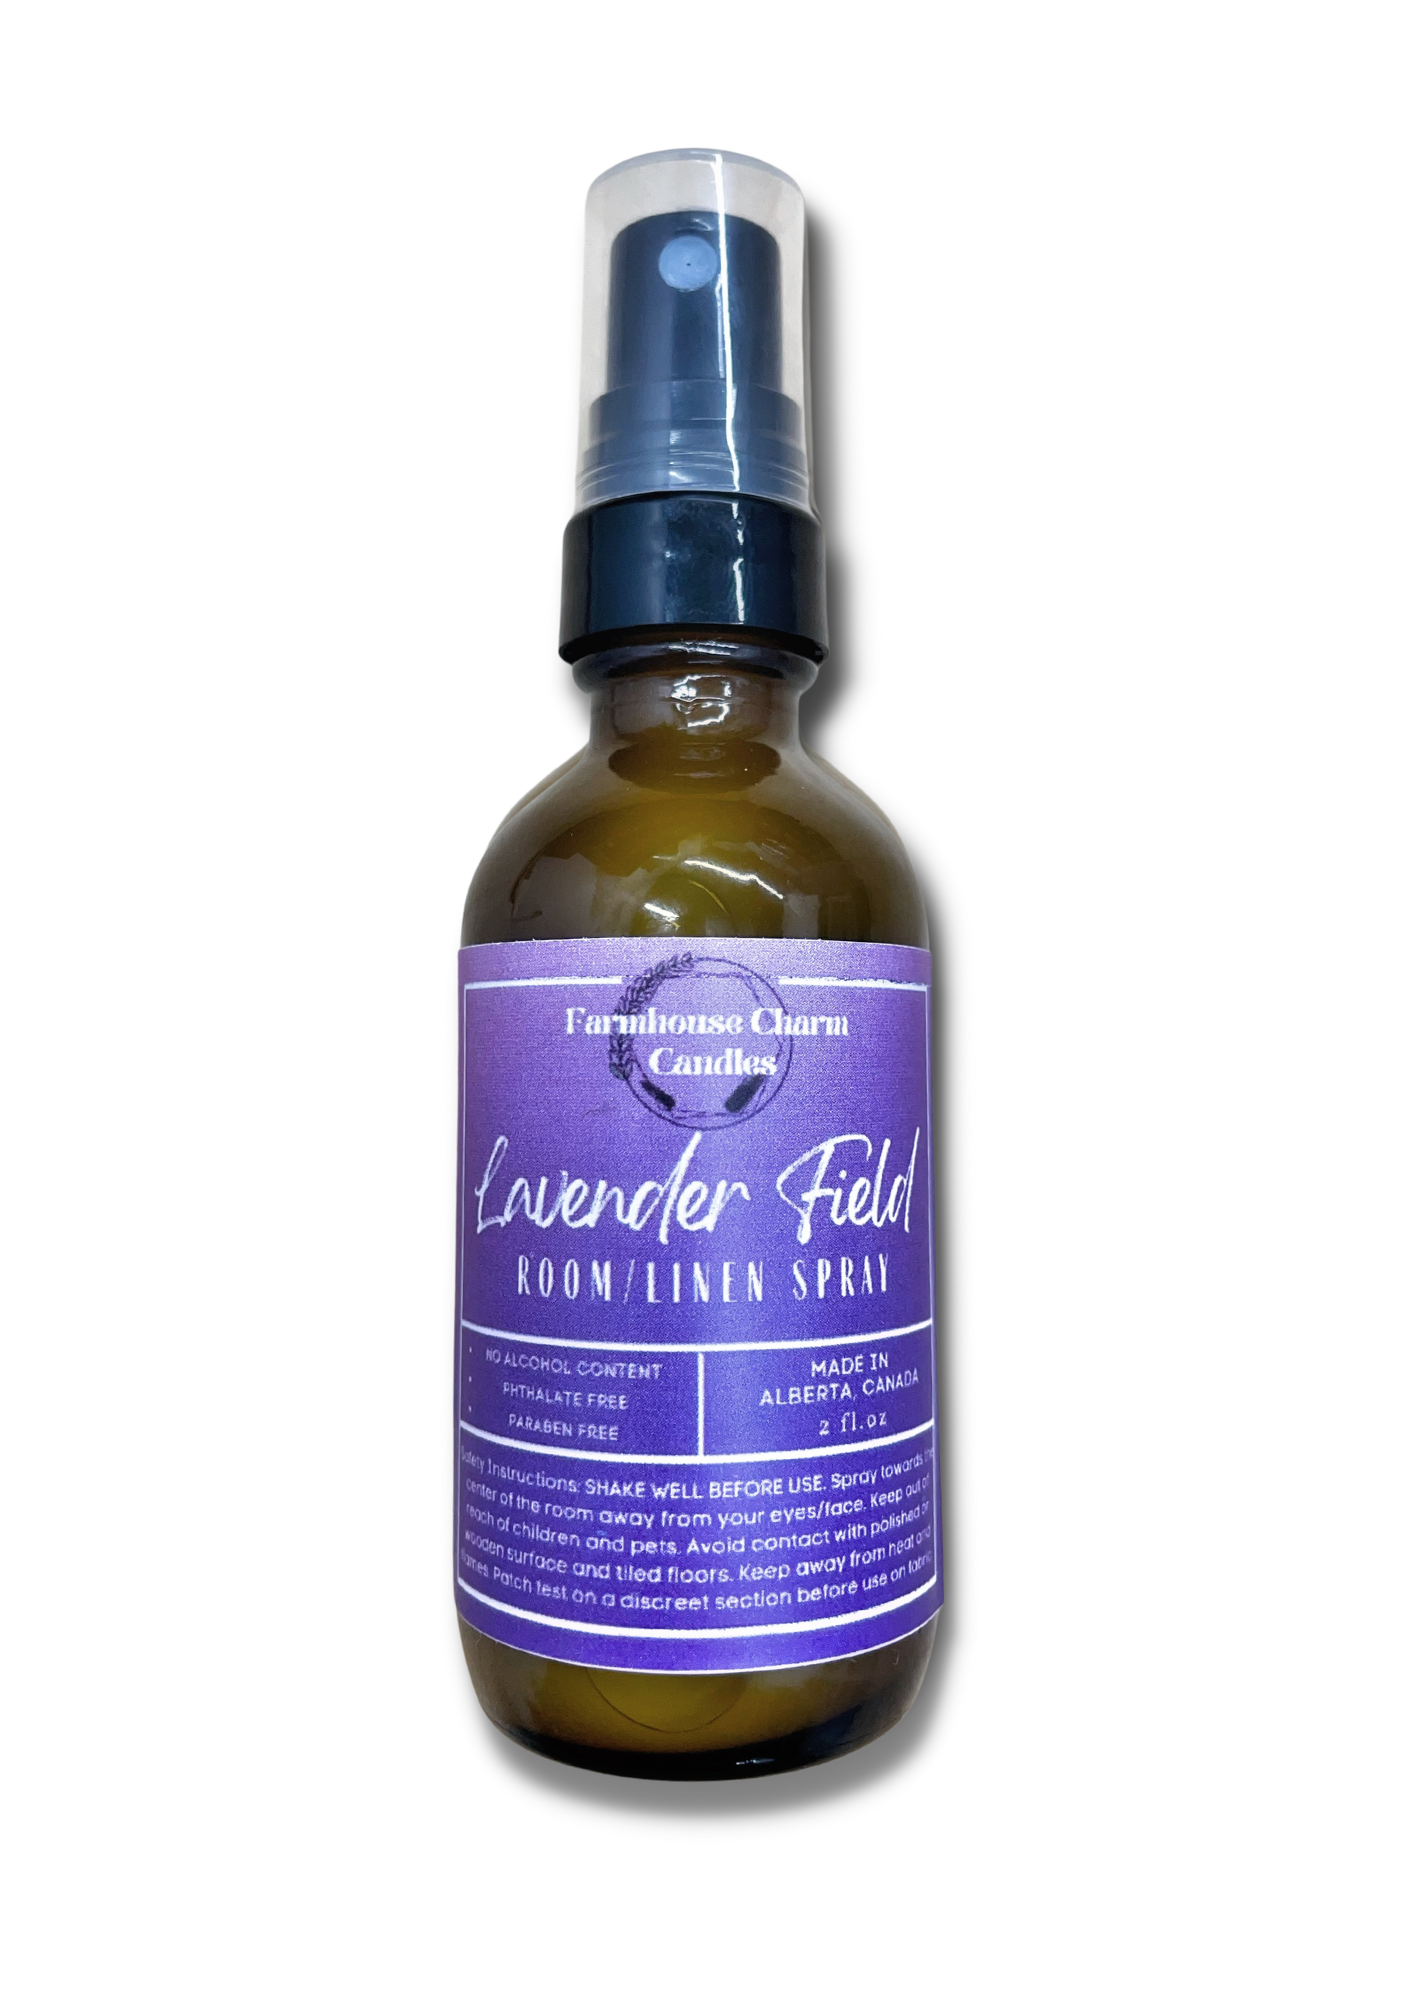 Lavender Field Room and Linen Spray- Farmhouse Charm is the latest blend of classic Lavender. The blend has a deep floral tone of French lavender.  It has an undertone of amber, Egyptian musk and tonka bean which add warmth and richness to this floral bouquet.  Lavender Field Room and Linen Spray- Farmhouse Charm  Net Weight: 2 oz No Alcohol Content Phthalate Free Paraben Free